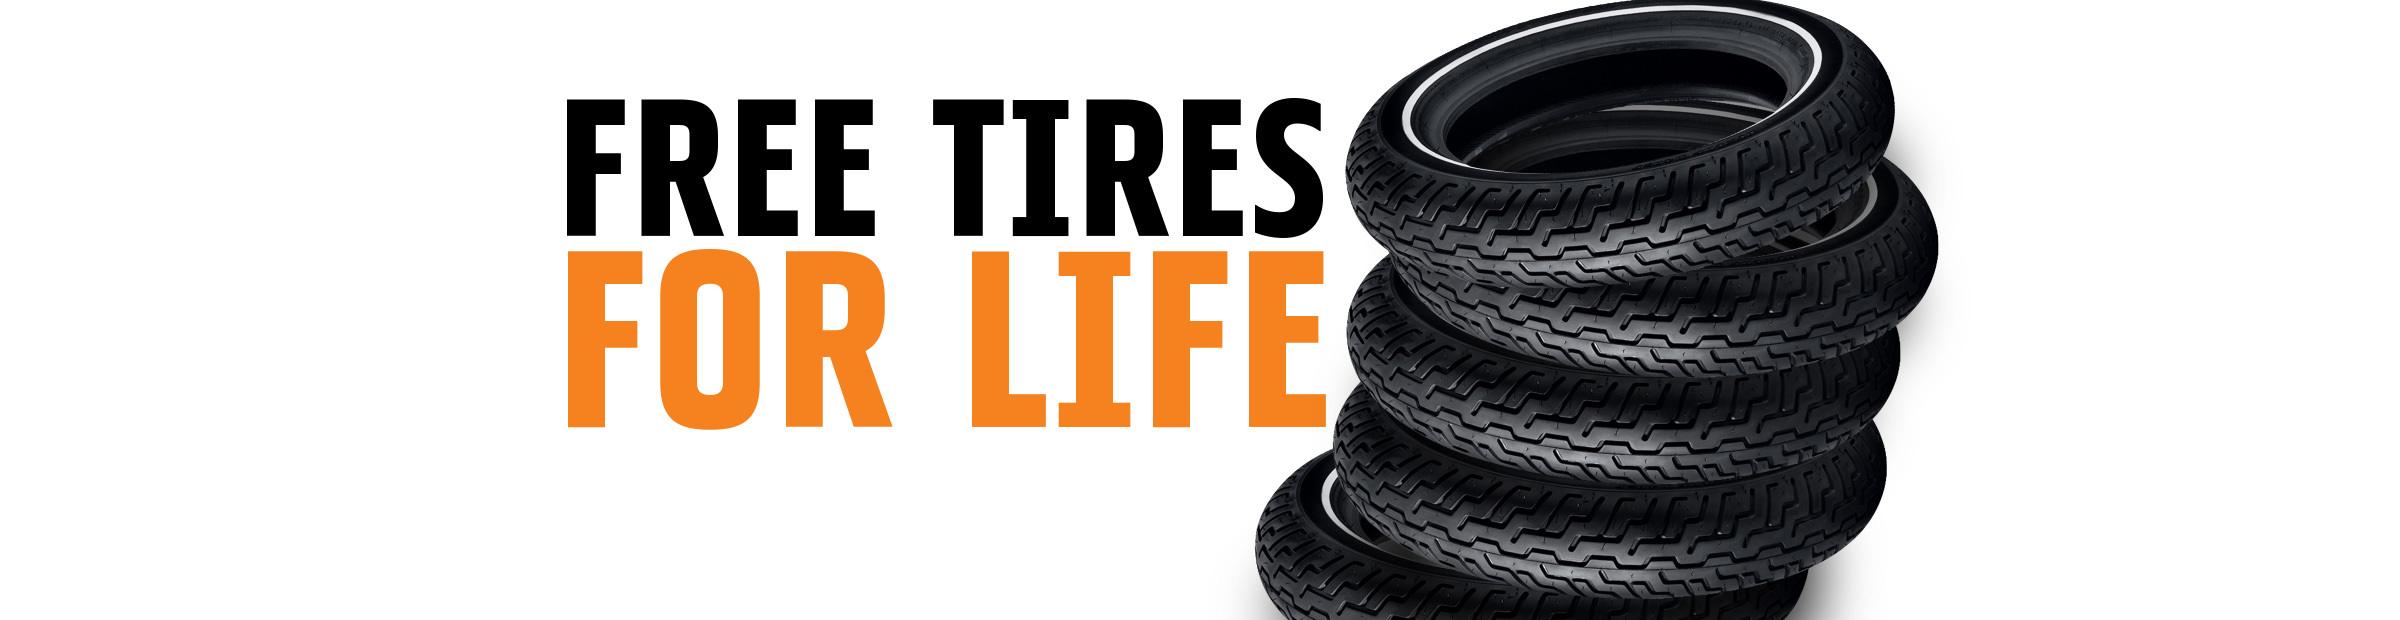 Free tires for life